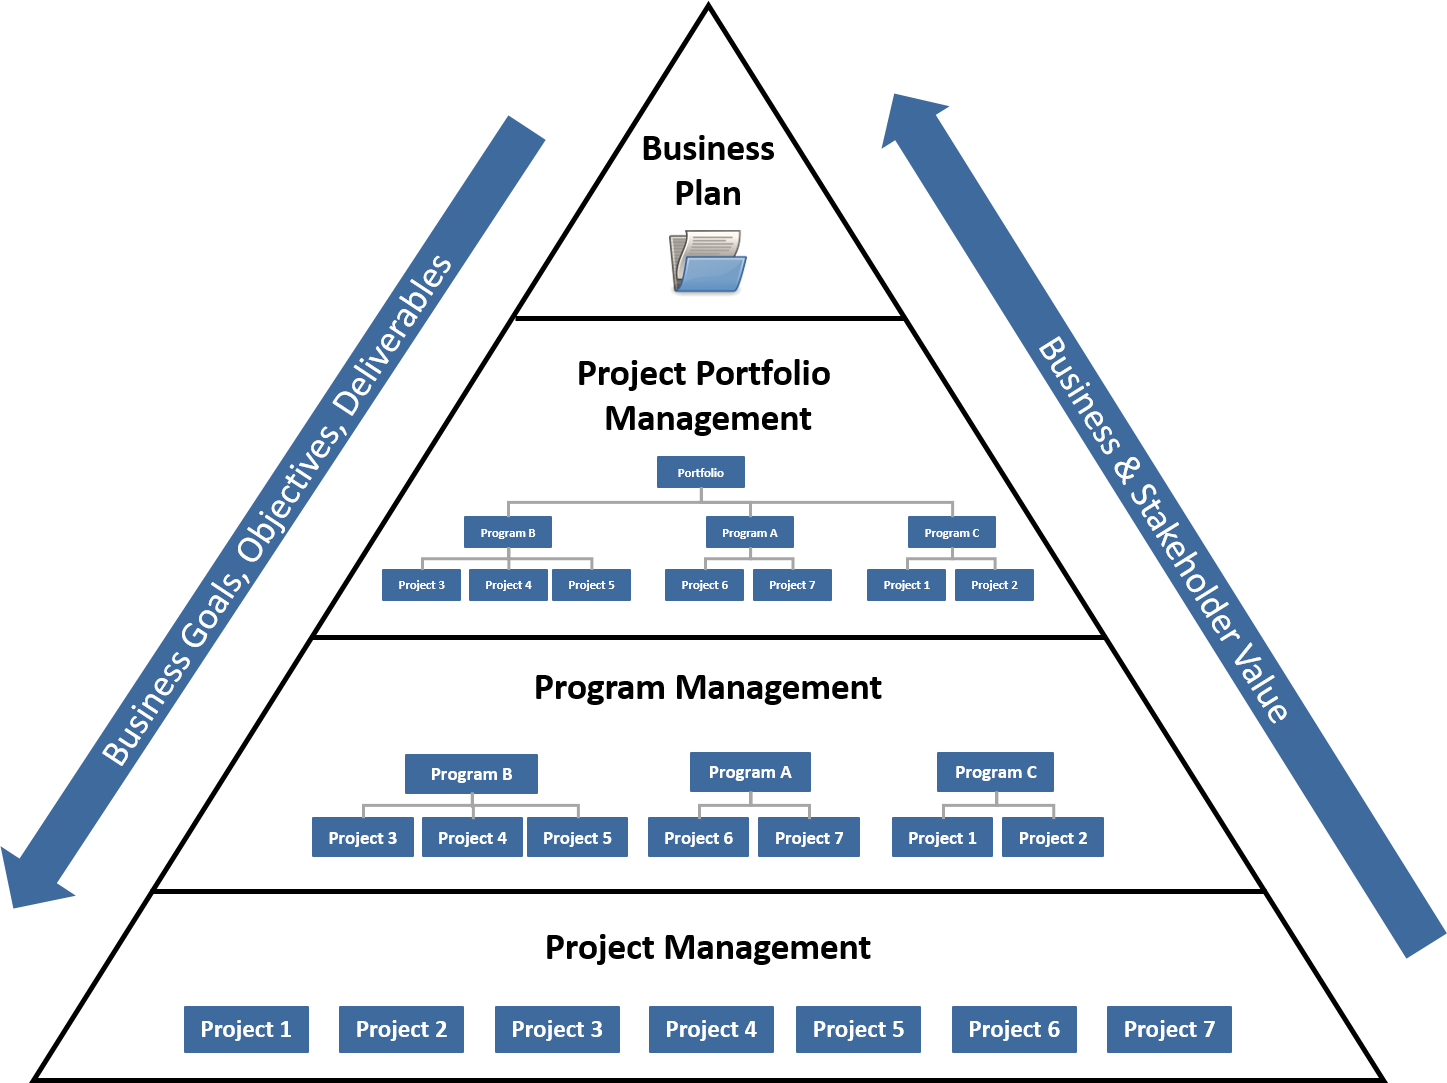 Project Based Organizational Structure